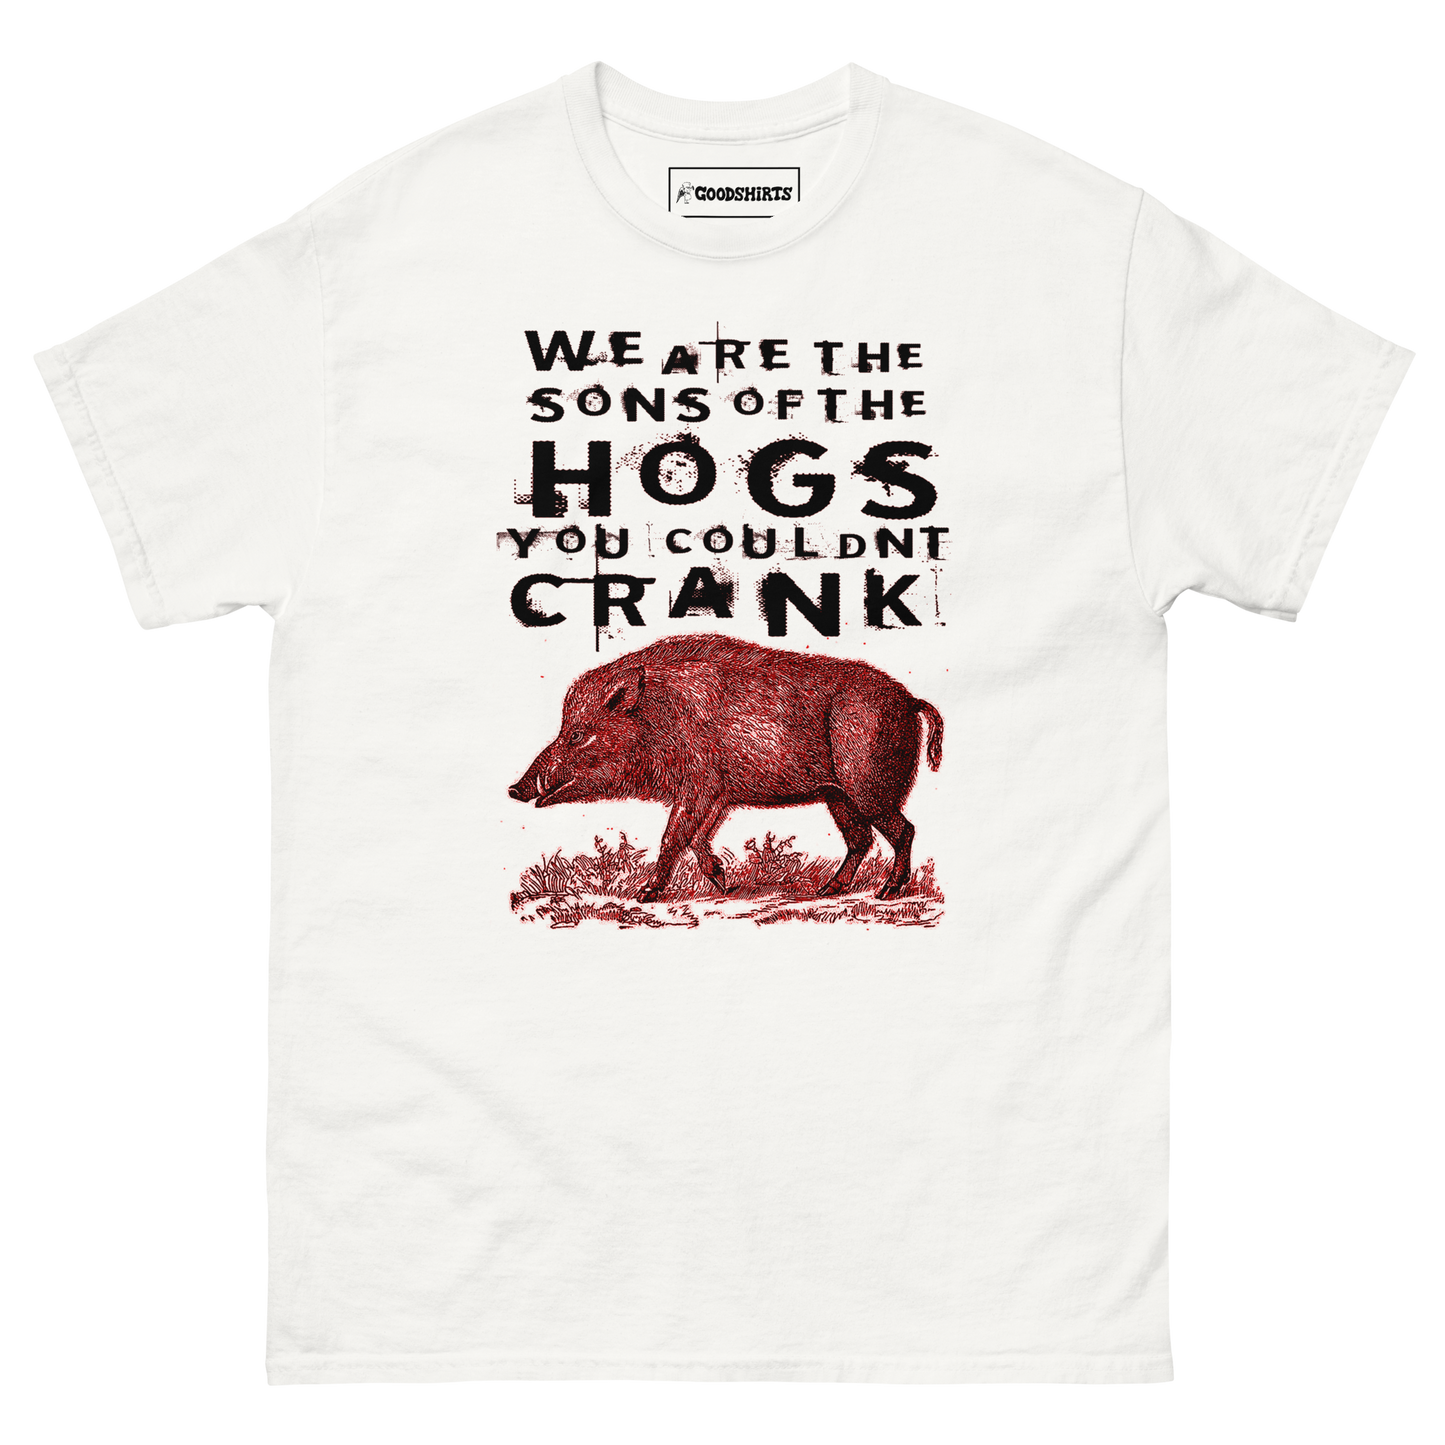 We Are The Sons Of The Hogs You Couldnt Crank.